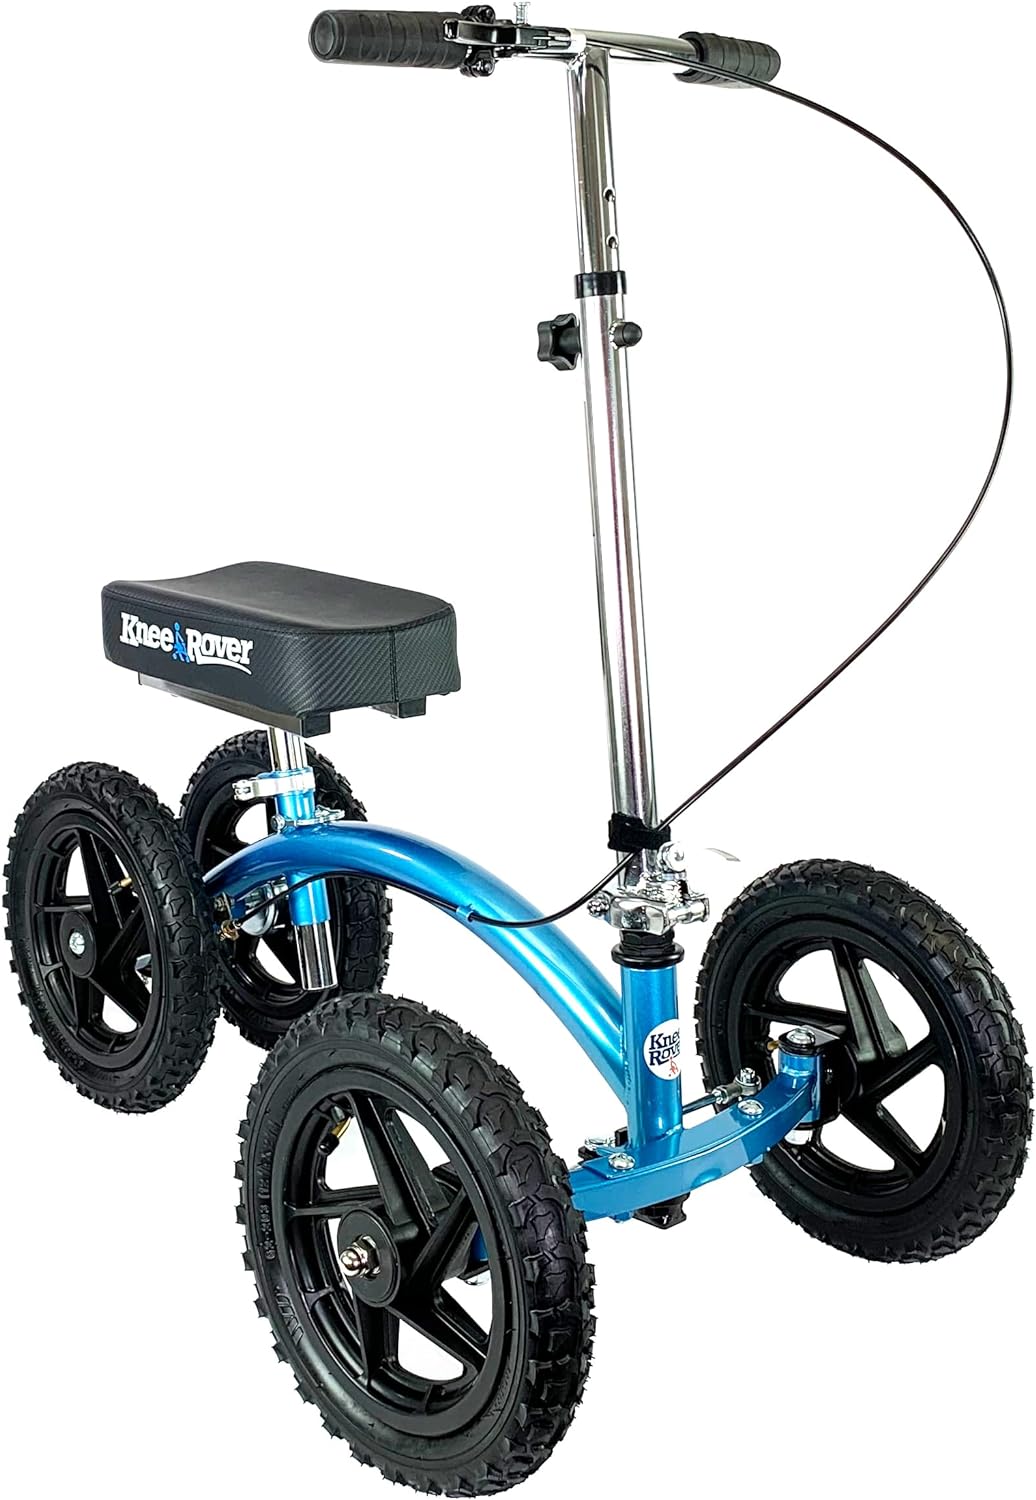 Knee Walker Rent and Purchase